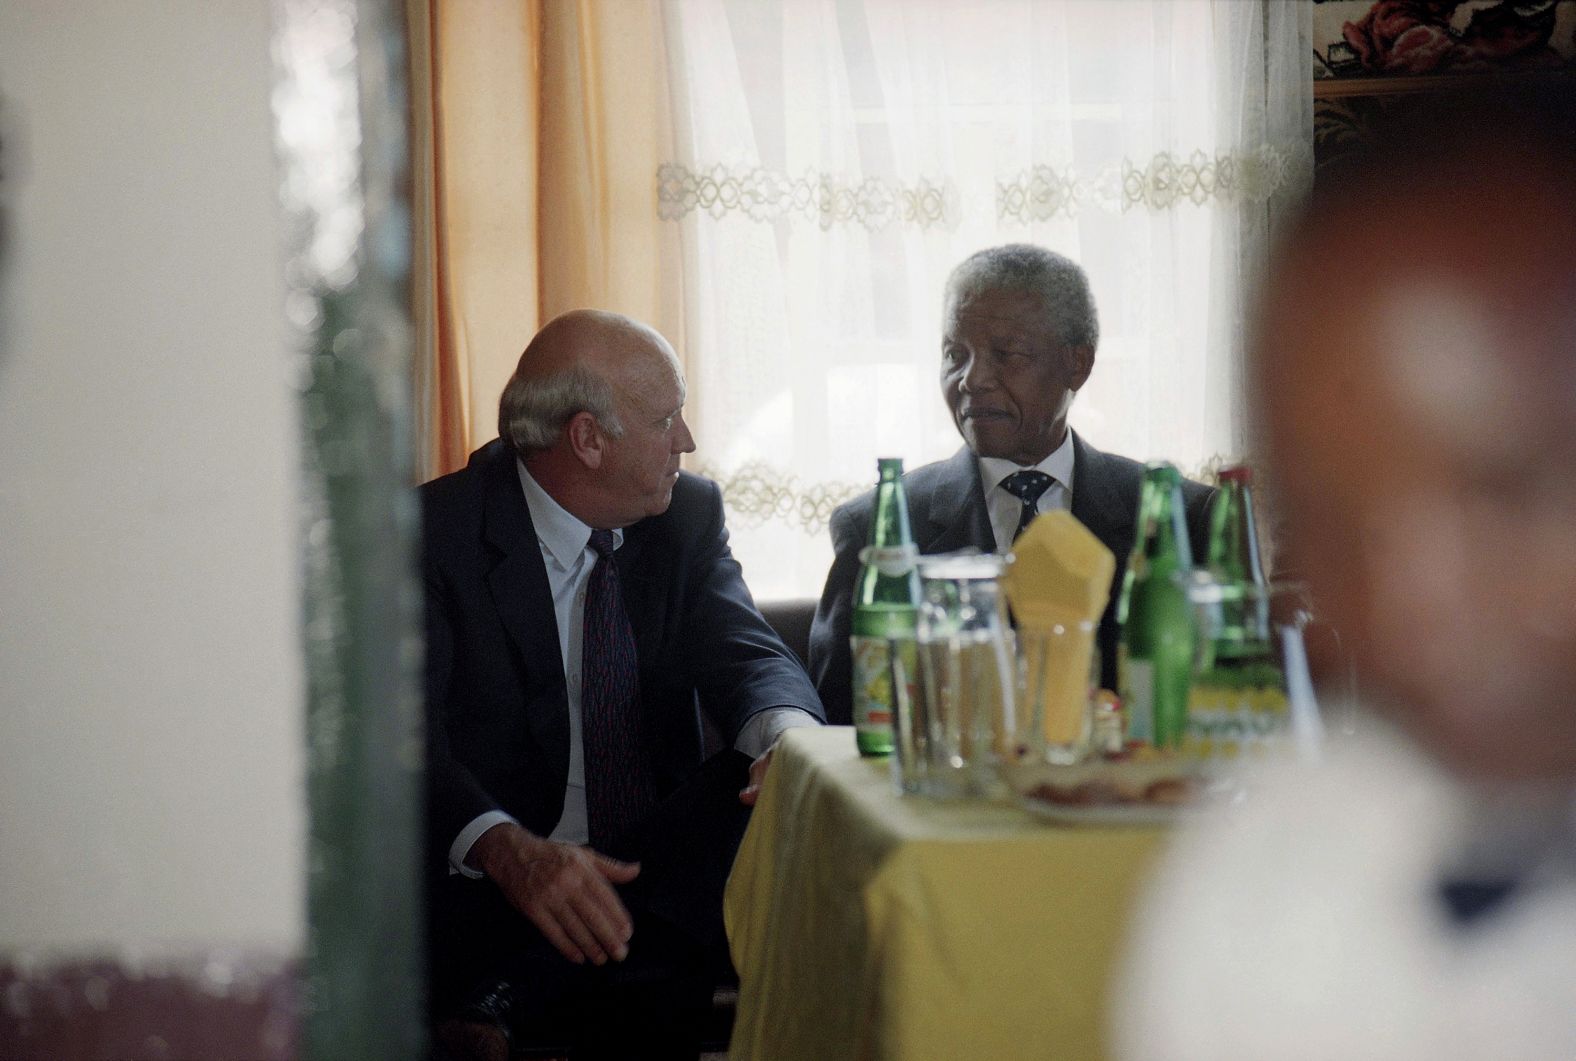 De Klerk and Mandela meet privately  on April 3, 1994, before attending the Zion Christian Church Easter Mass in Moria, South Africa.